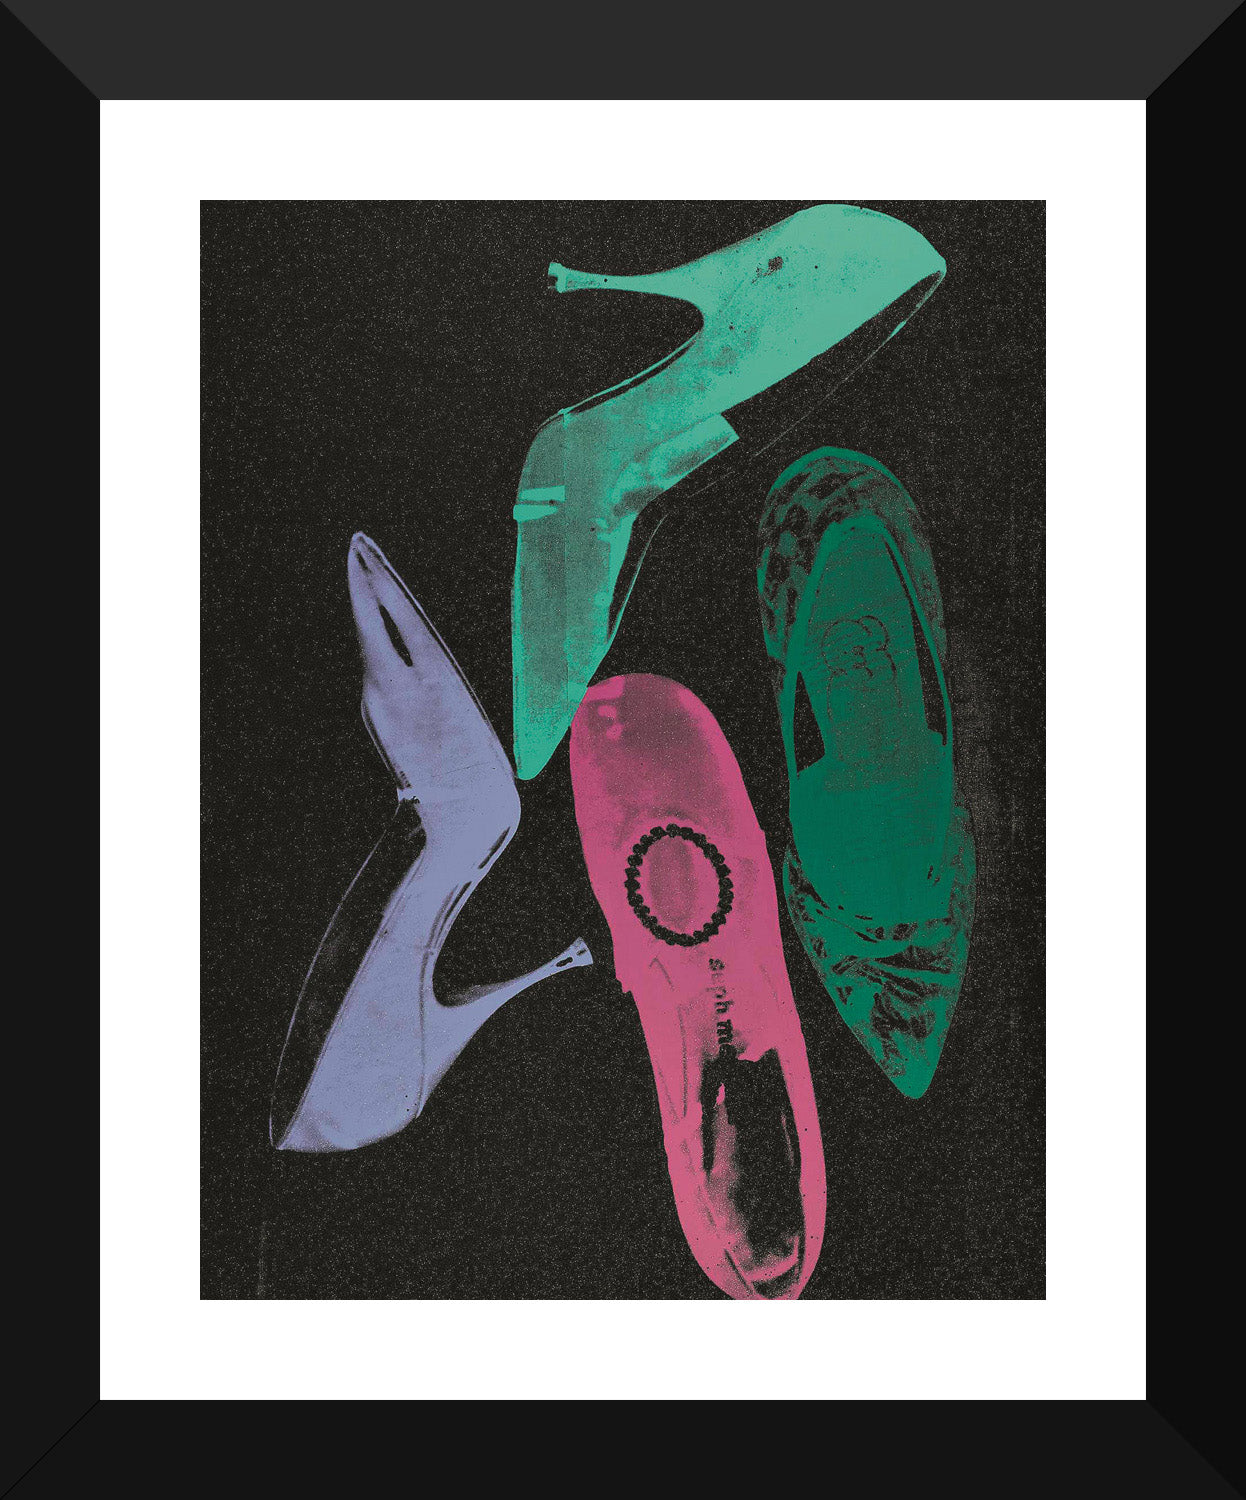 Set Of 3 Andy Warhol - Diamond Dust Shoes - Framed Digital Art Print (12x9)  by Andy Warhol | Buy Posters, Frames, Canvas & Digital Art Prints | Small,  Compact, Medium and Large Variants